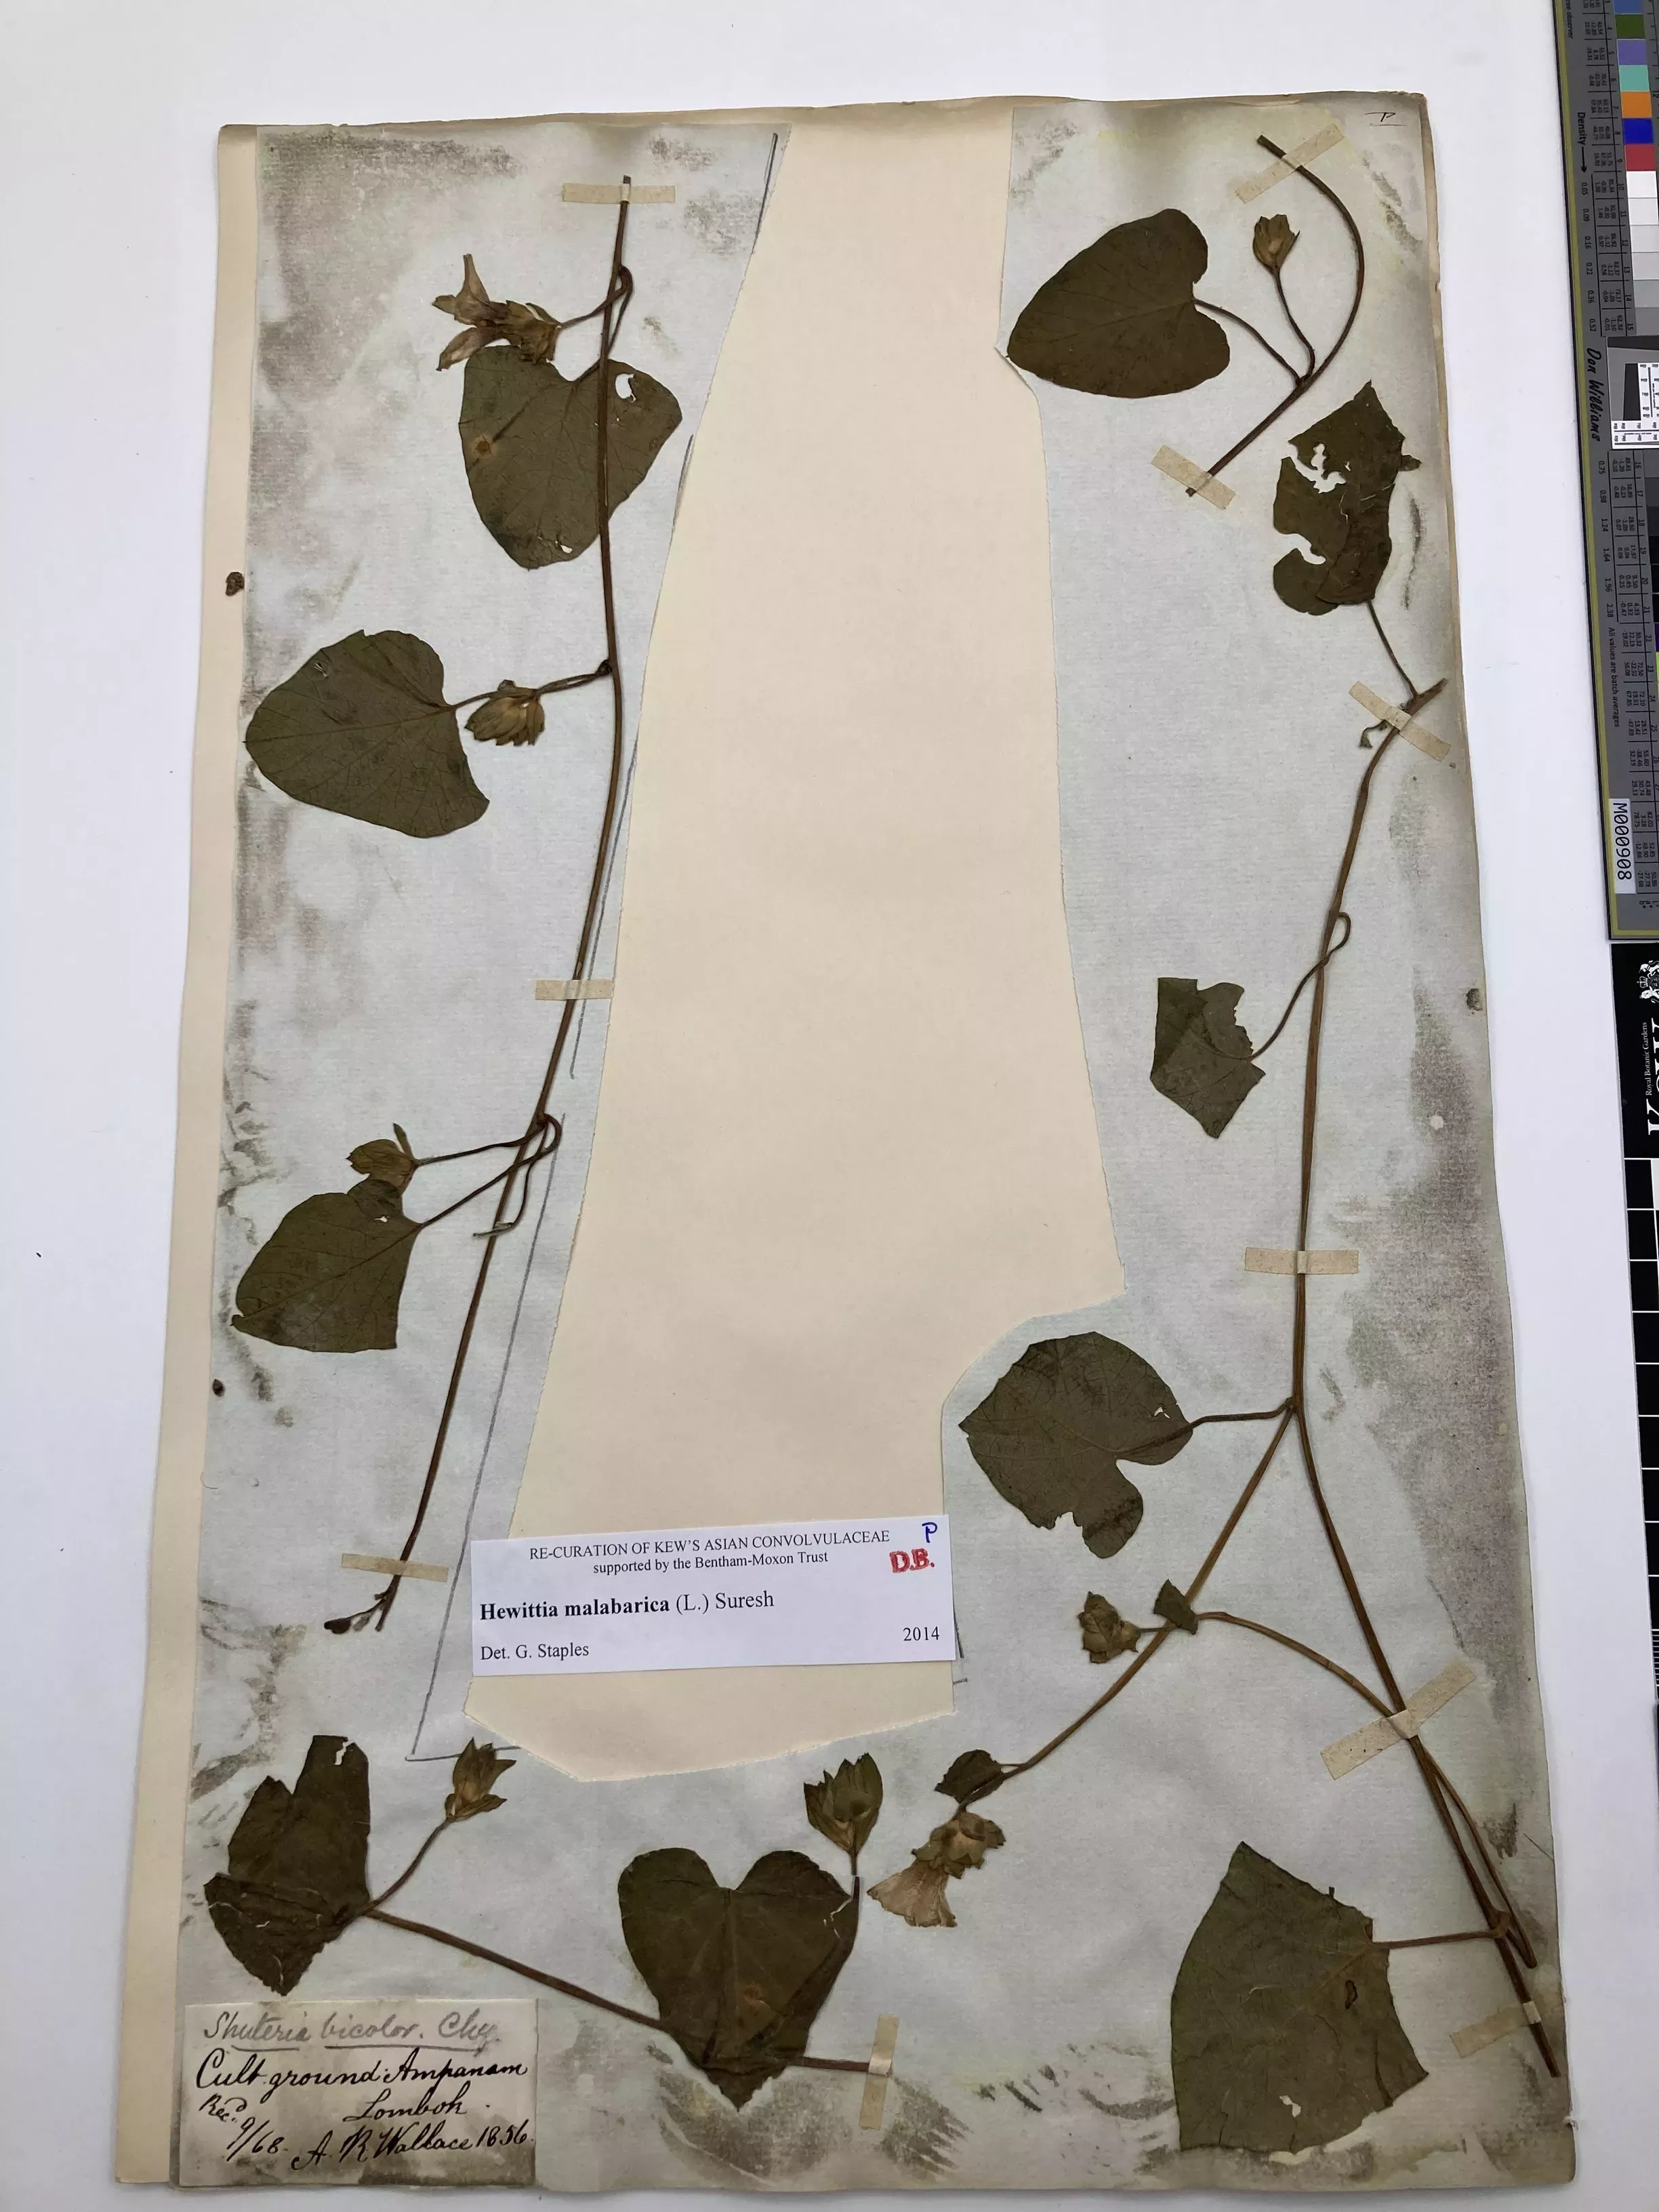 An Alfred Russel Wallace herbarium specimen showing the plant he collected